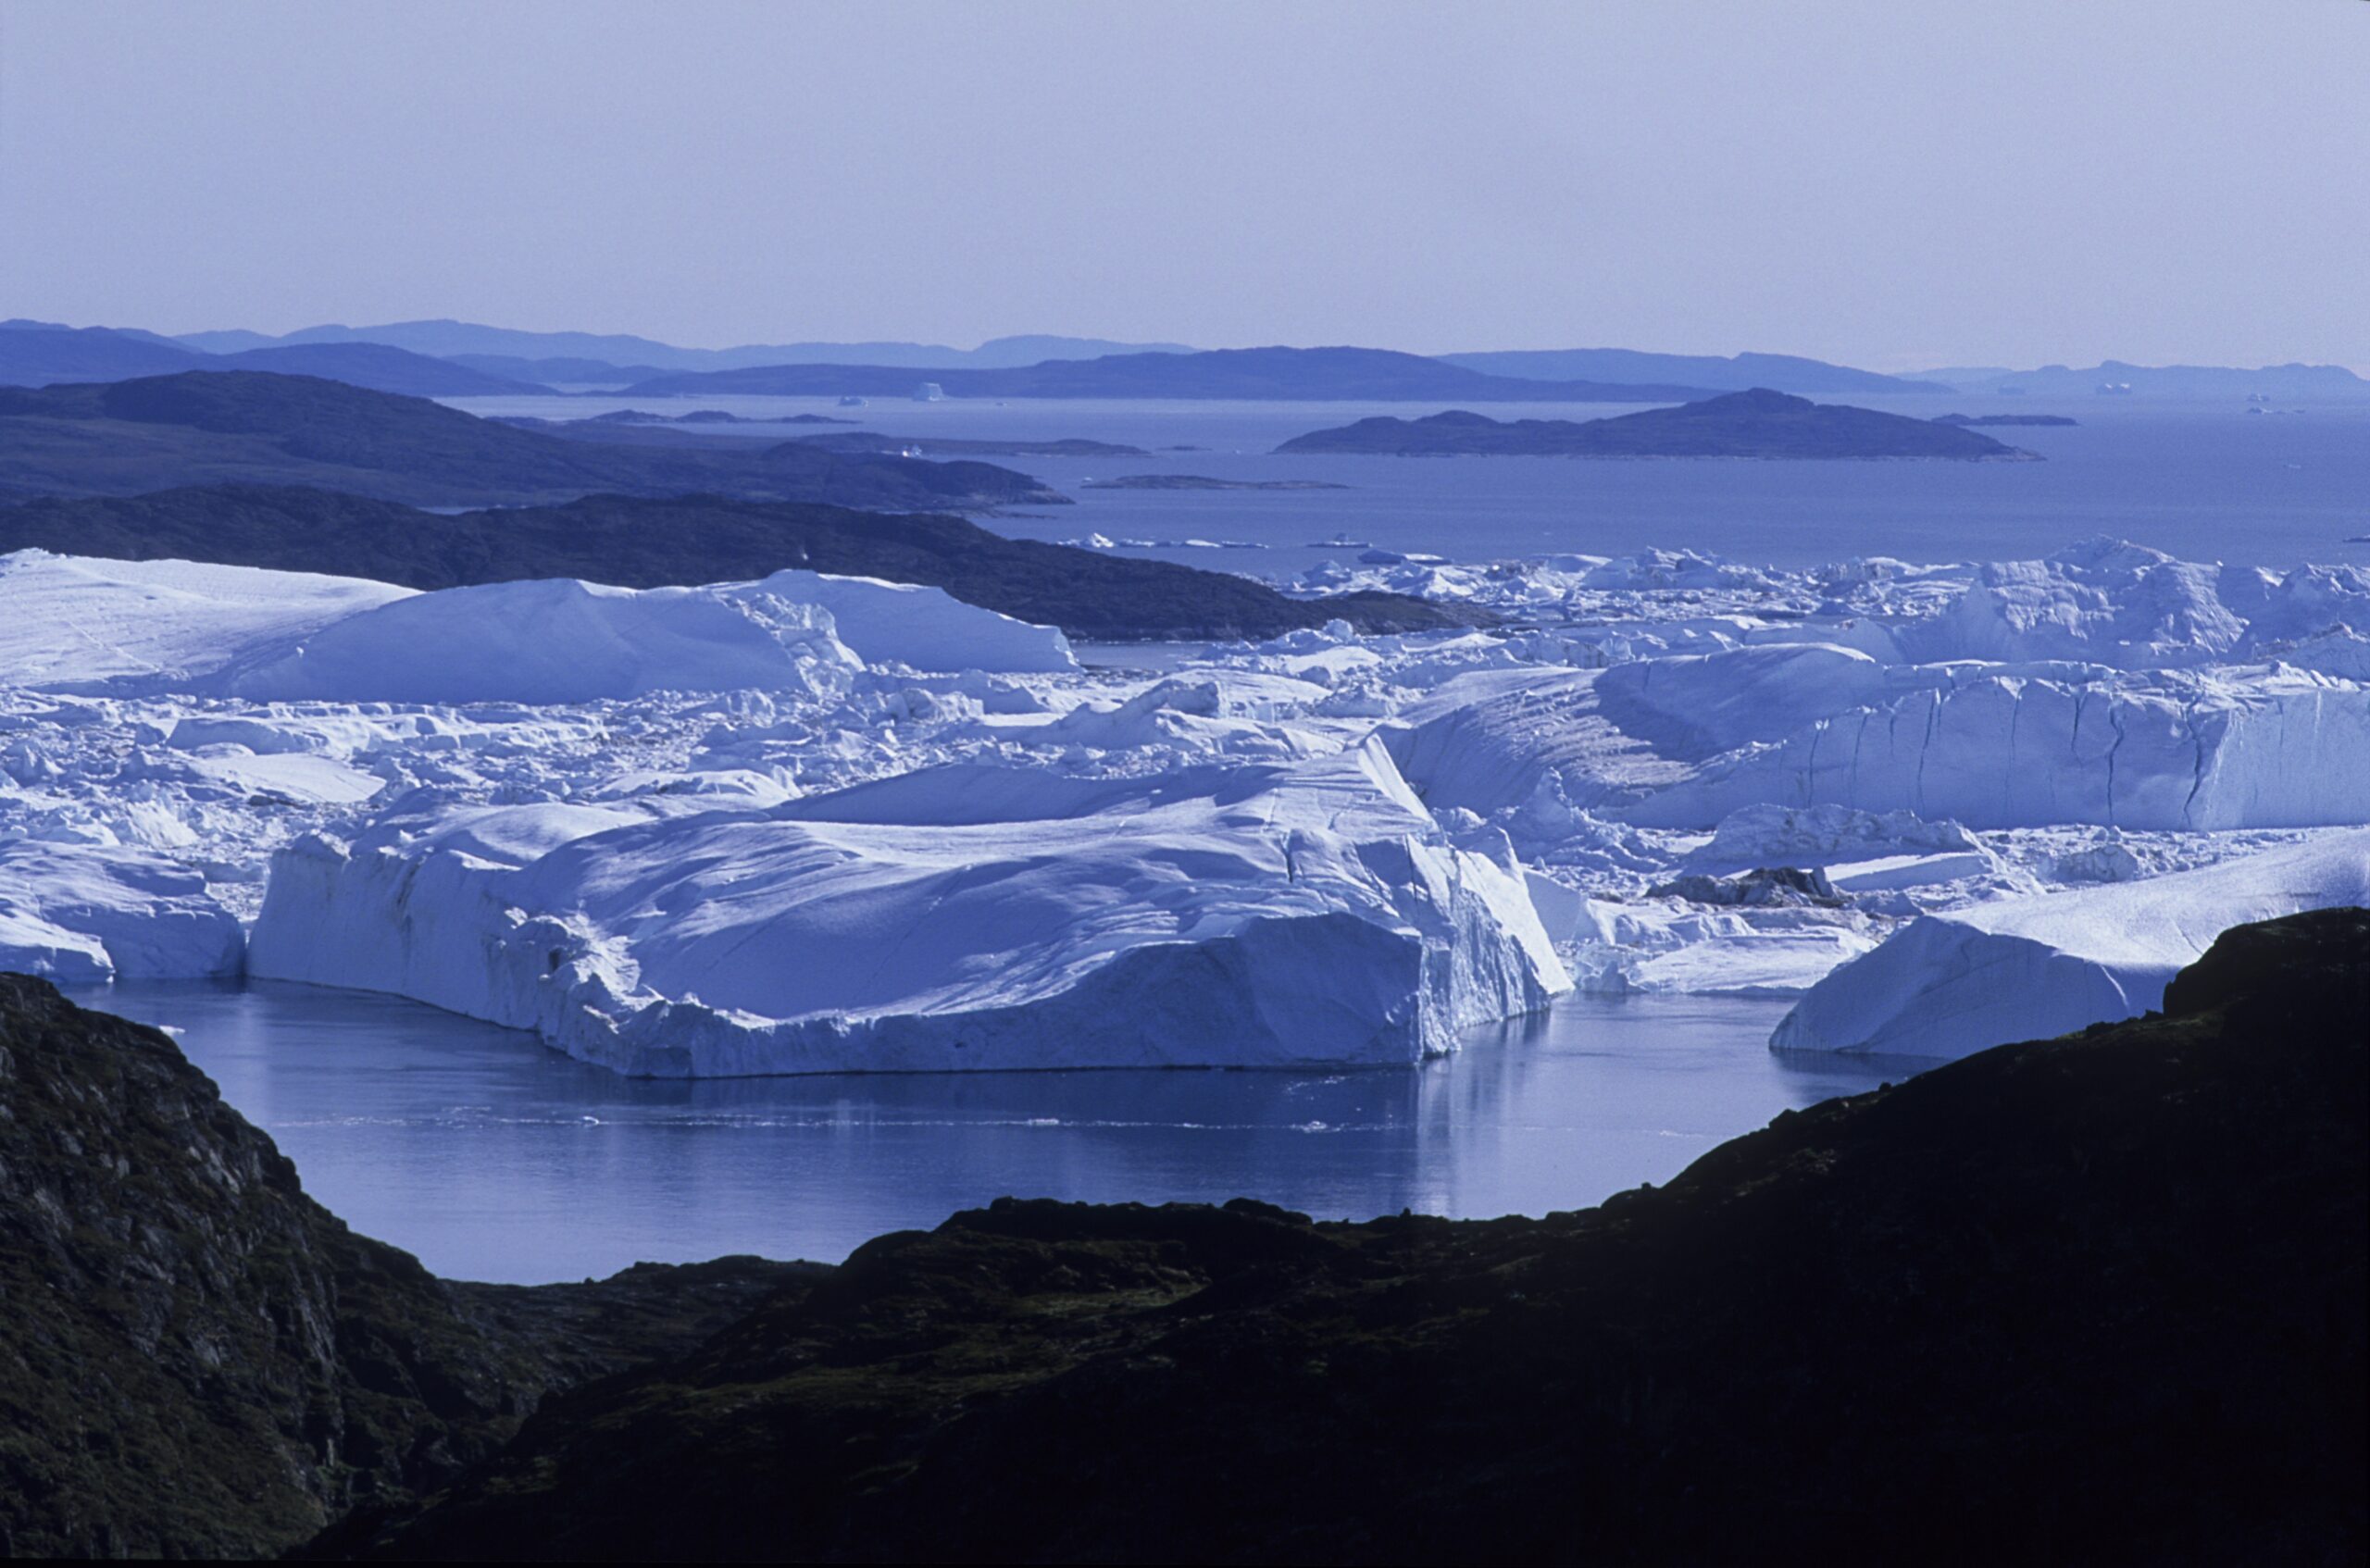 The Ilulissat Ice fjord in Greenland runs west 25 miles from the Greenland ice sheet to Disko Bay close to Ilulissat town. Credit: Veronique Durruty/Gamma-Rapho via Getty Images.